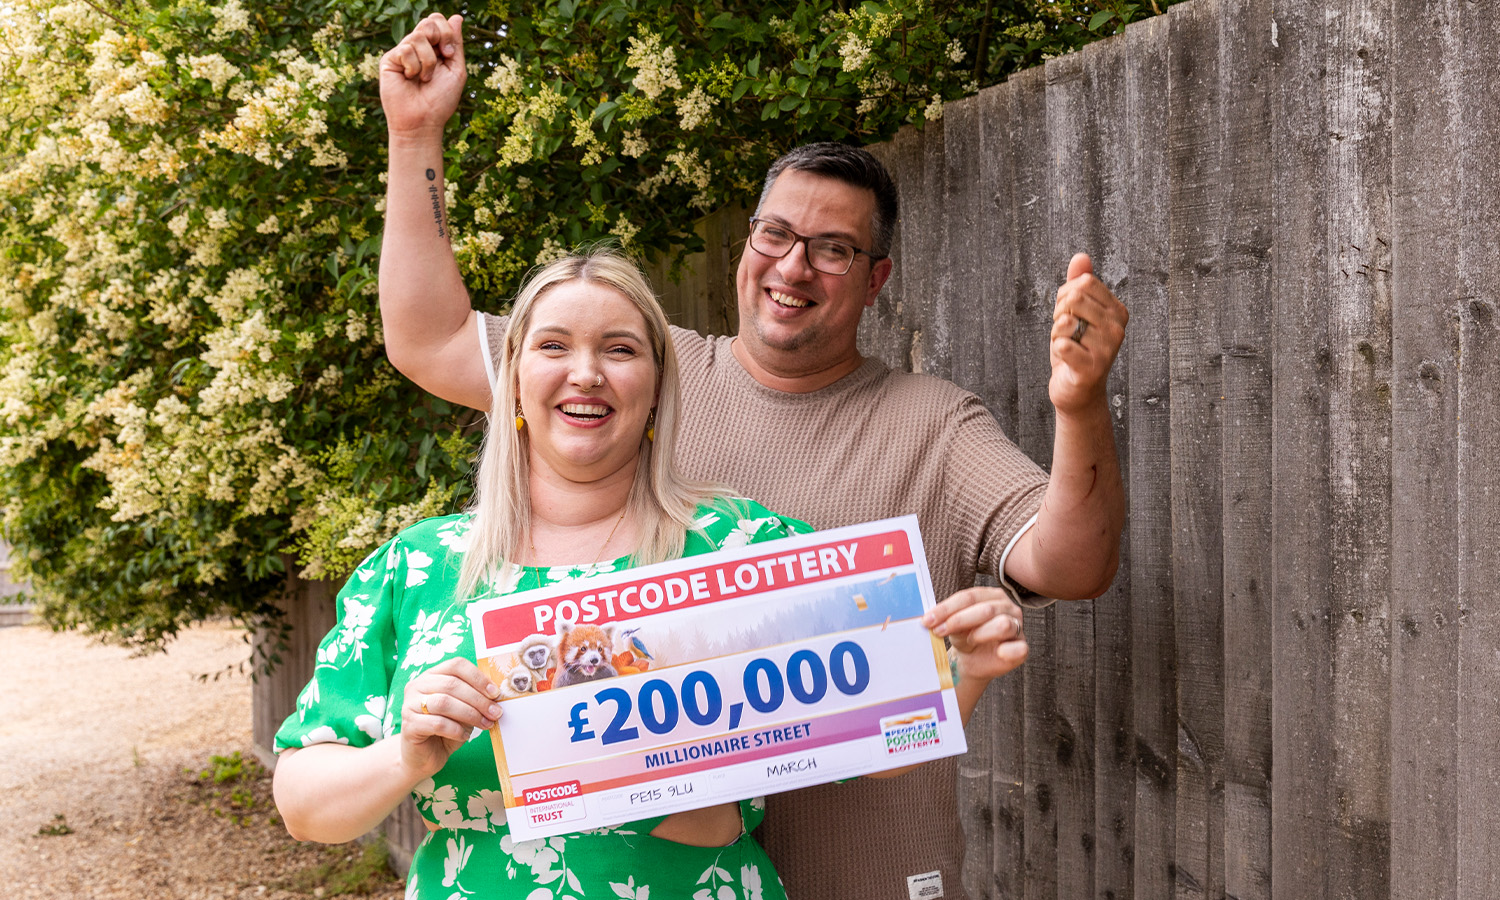 GLEE FOR TWO: Sally and hubby Jonny's joy at win